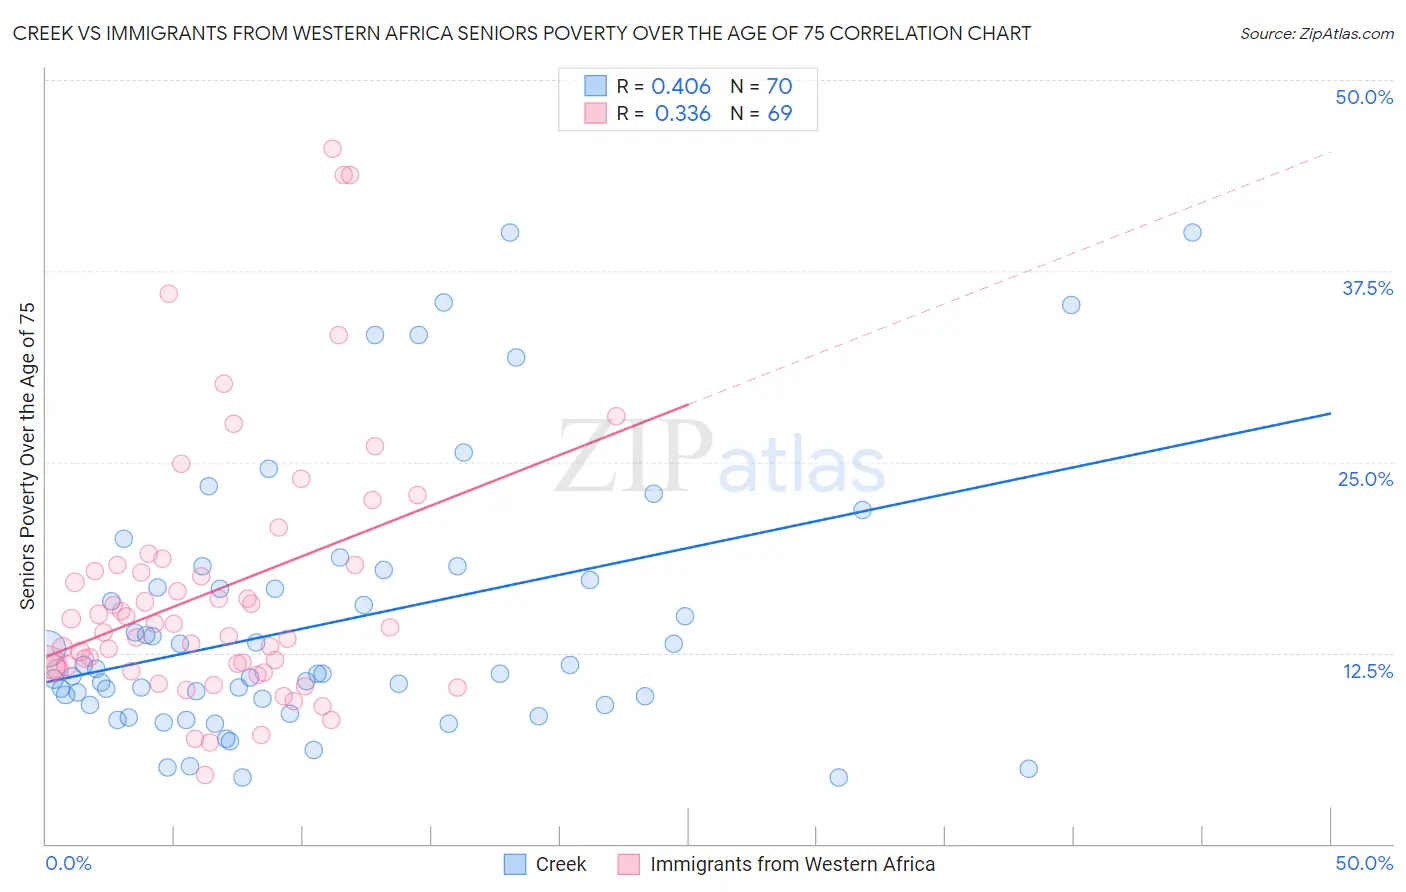 Creek vs Immigrants from Western Africa Seniors Poverty Over the Age of 75